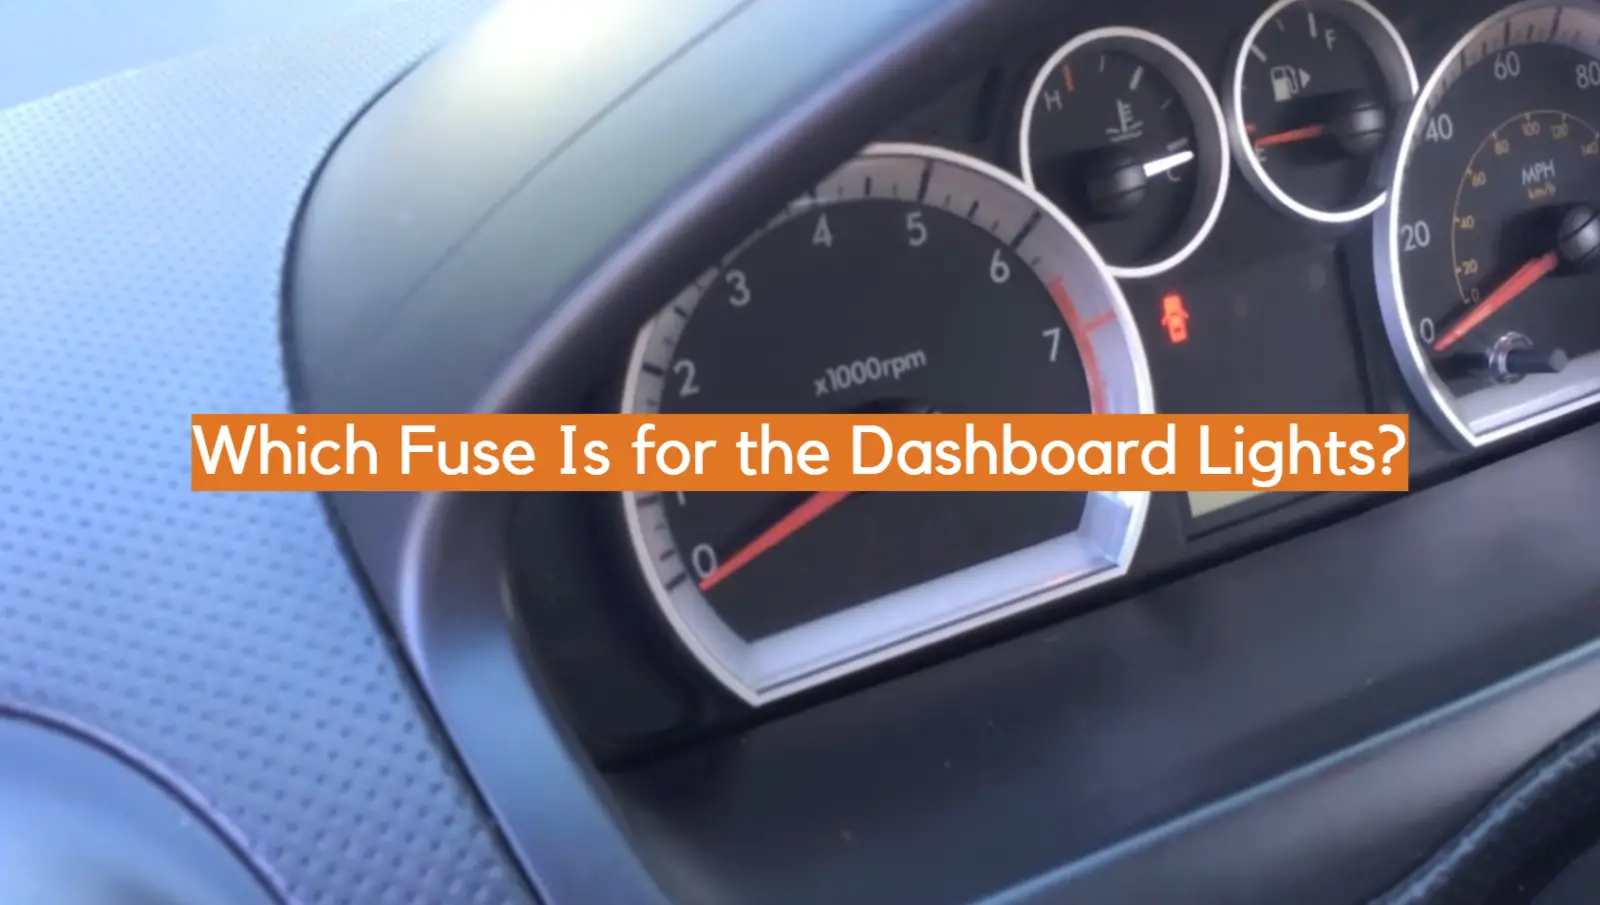 Which Fuse Is for the Dashboard Lights?